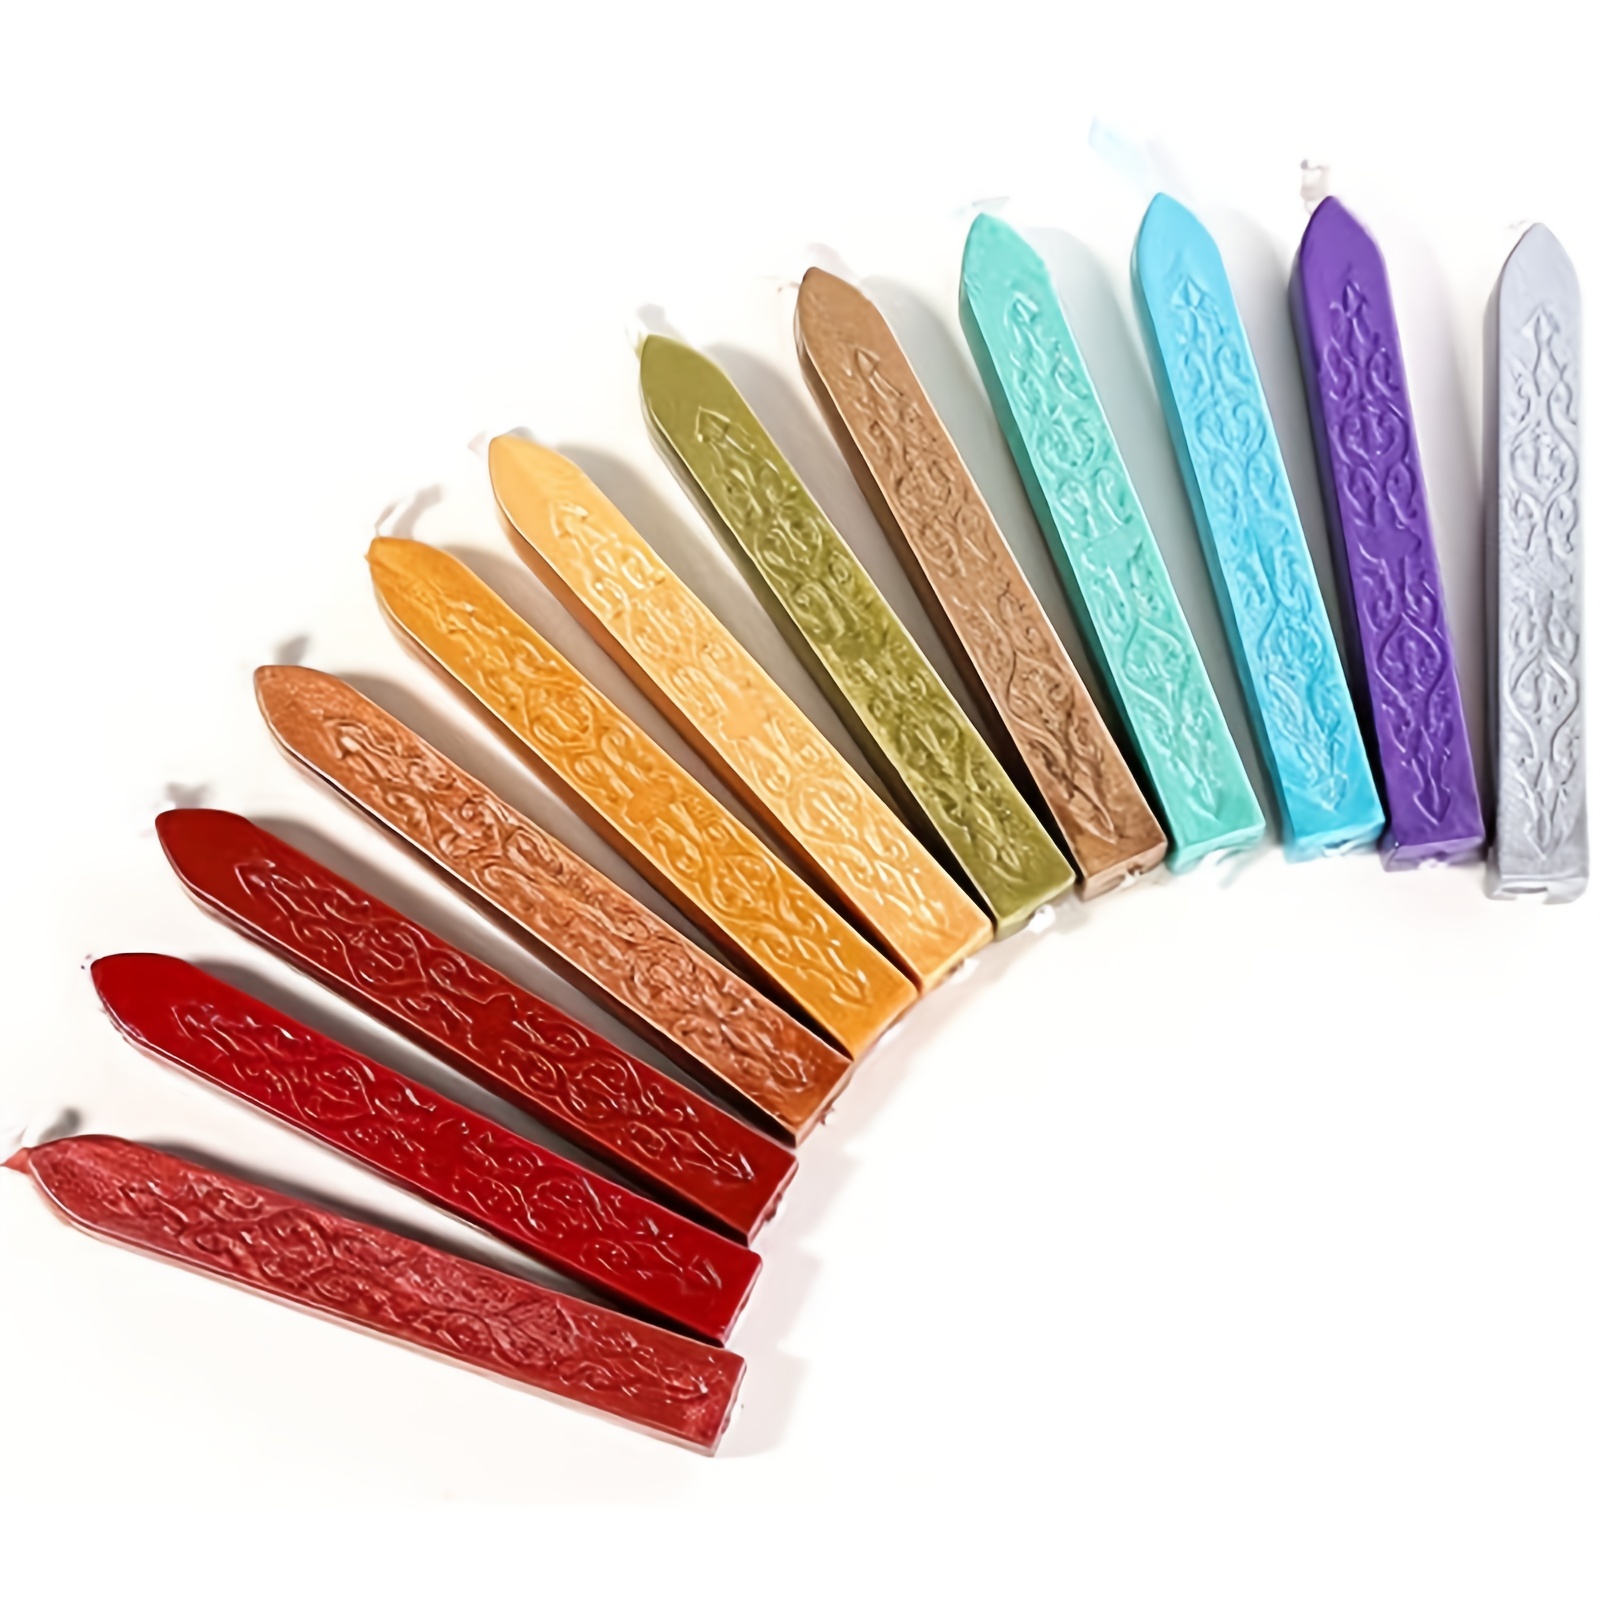 Bememo 12 Pieces Sealing Wax Sticks with Wicks Antique Fire Manuscript Sealing Wax for Wax Seal Stamp (12 Colors)